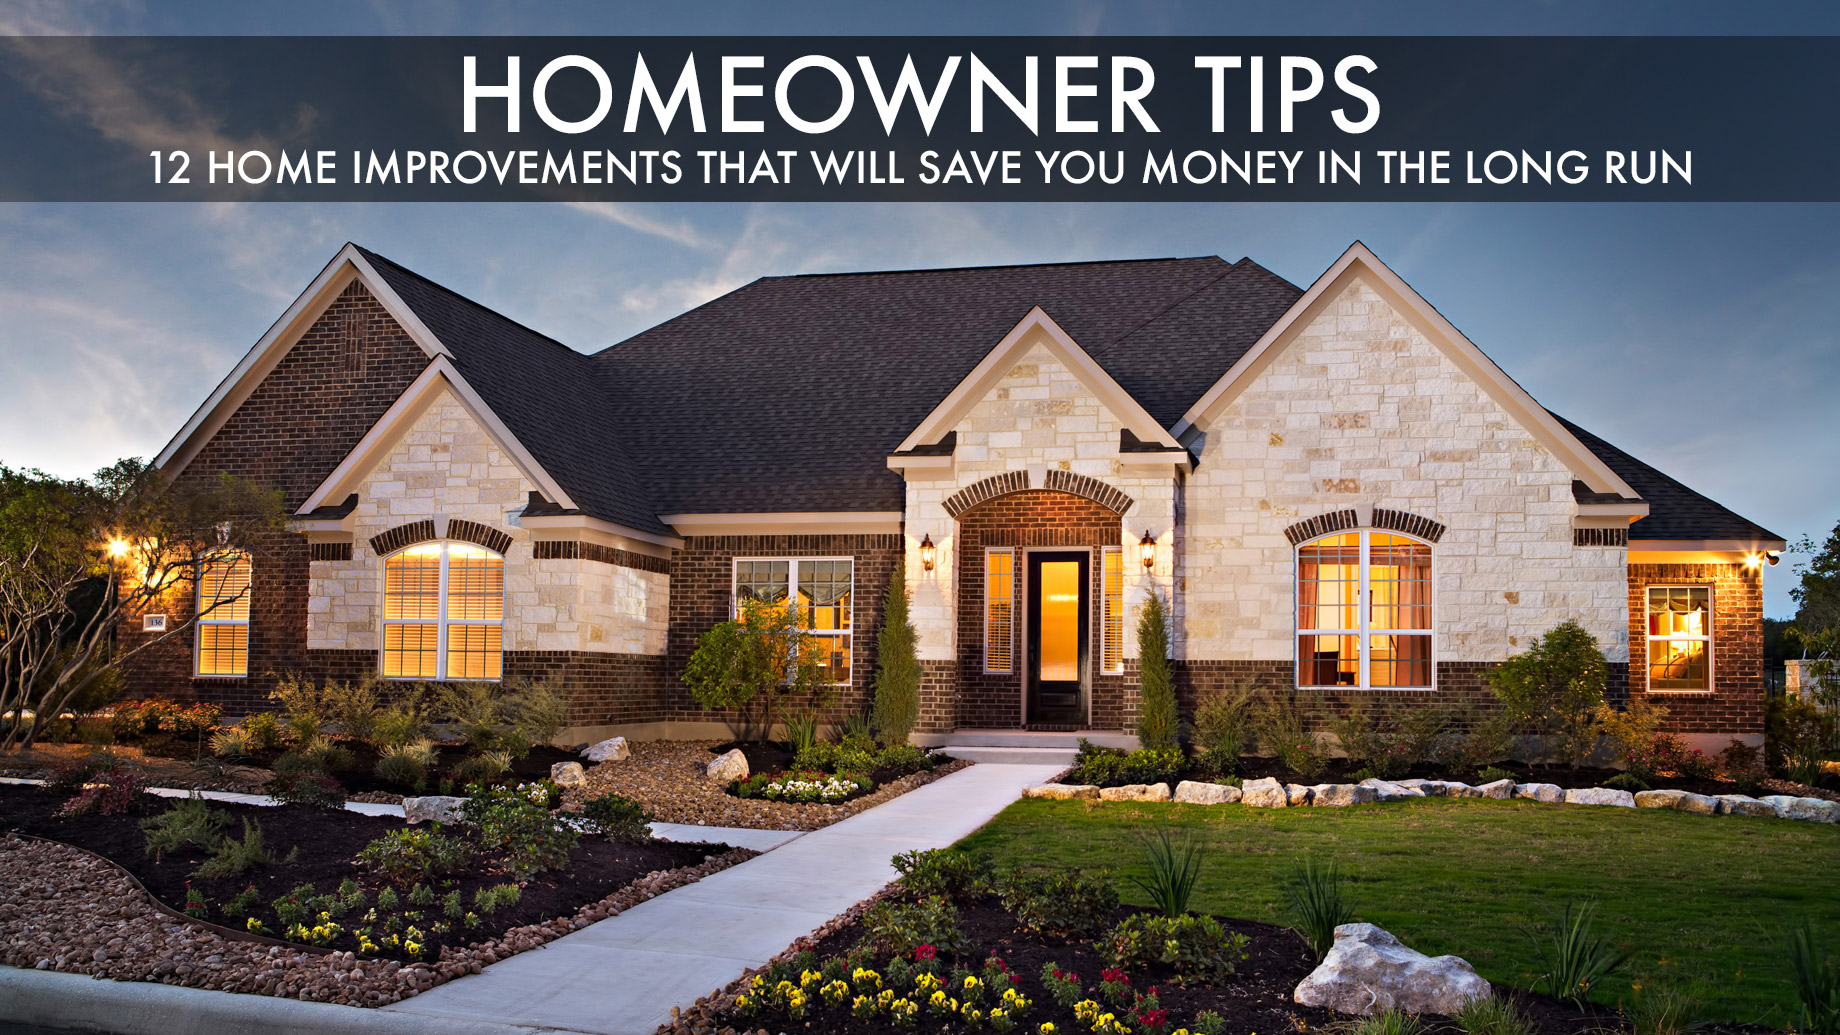 Homeowner Tips - 12 Home Improvements That Will Save You Money in the Long Run